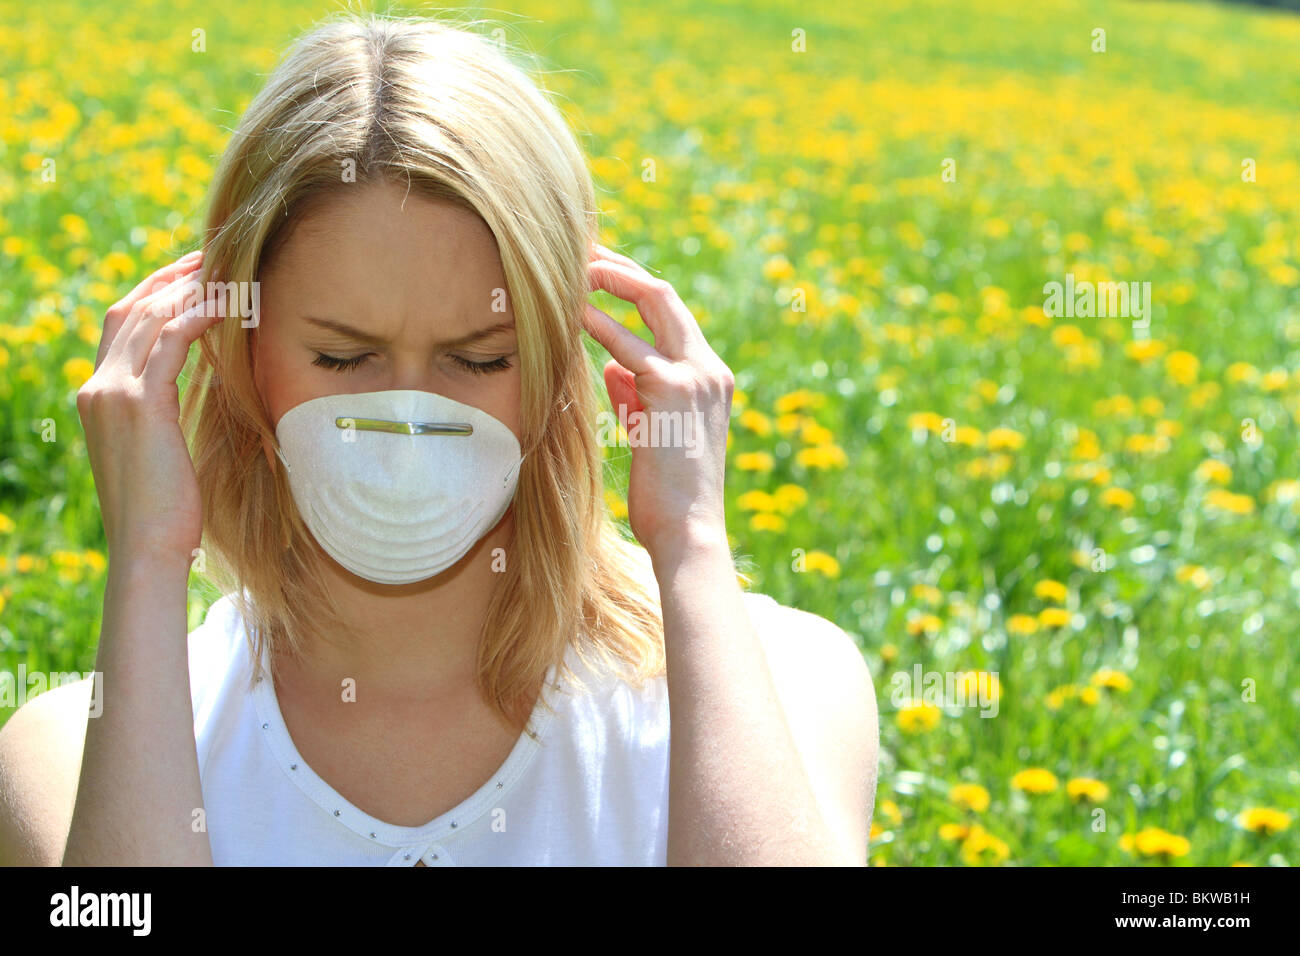 Women with pollen allergy in a Spring Meadow Stock Photo